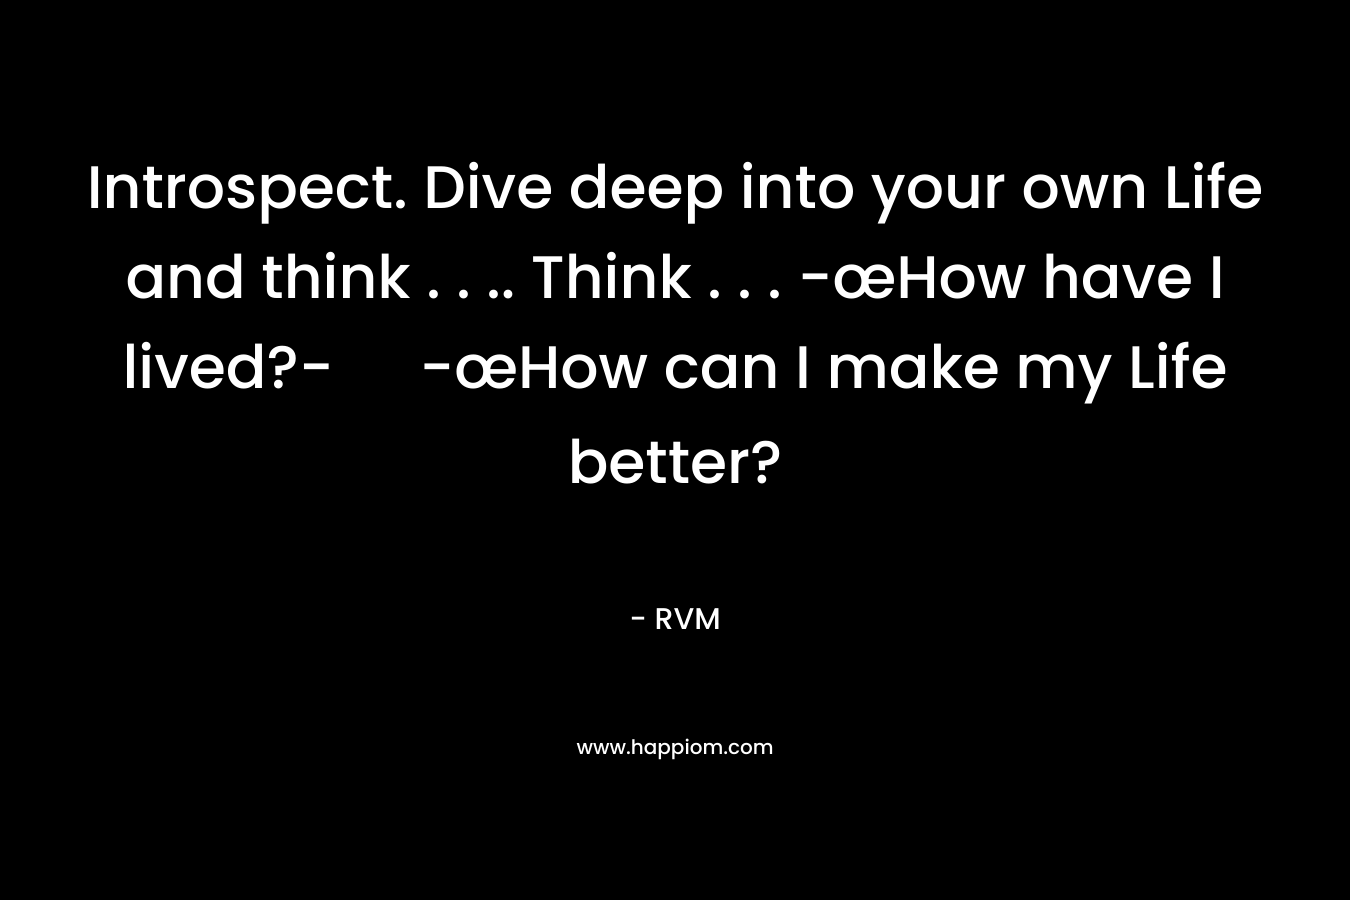 Introspect. Dive deep into your own Life and think . . .. Think . . . -œHow have I lived?- -œHow can I make my Life better?